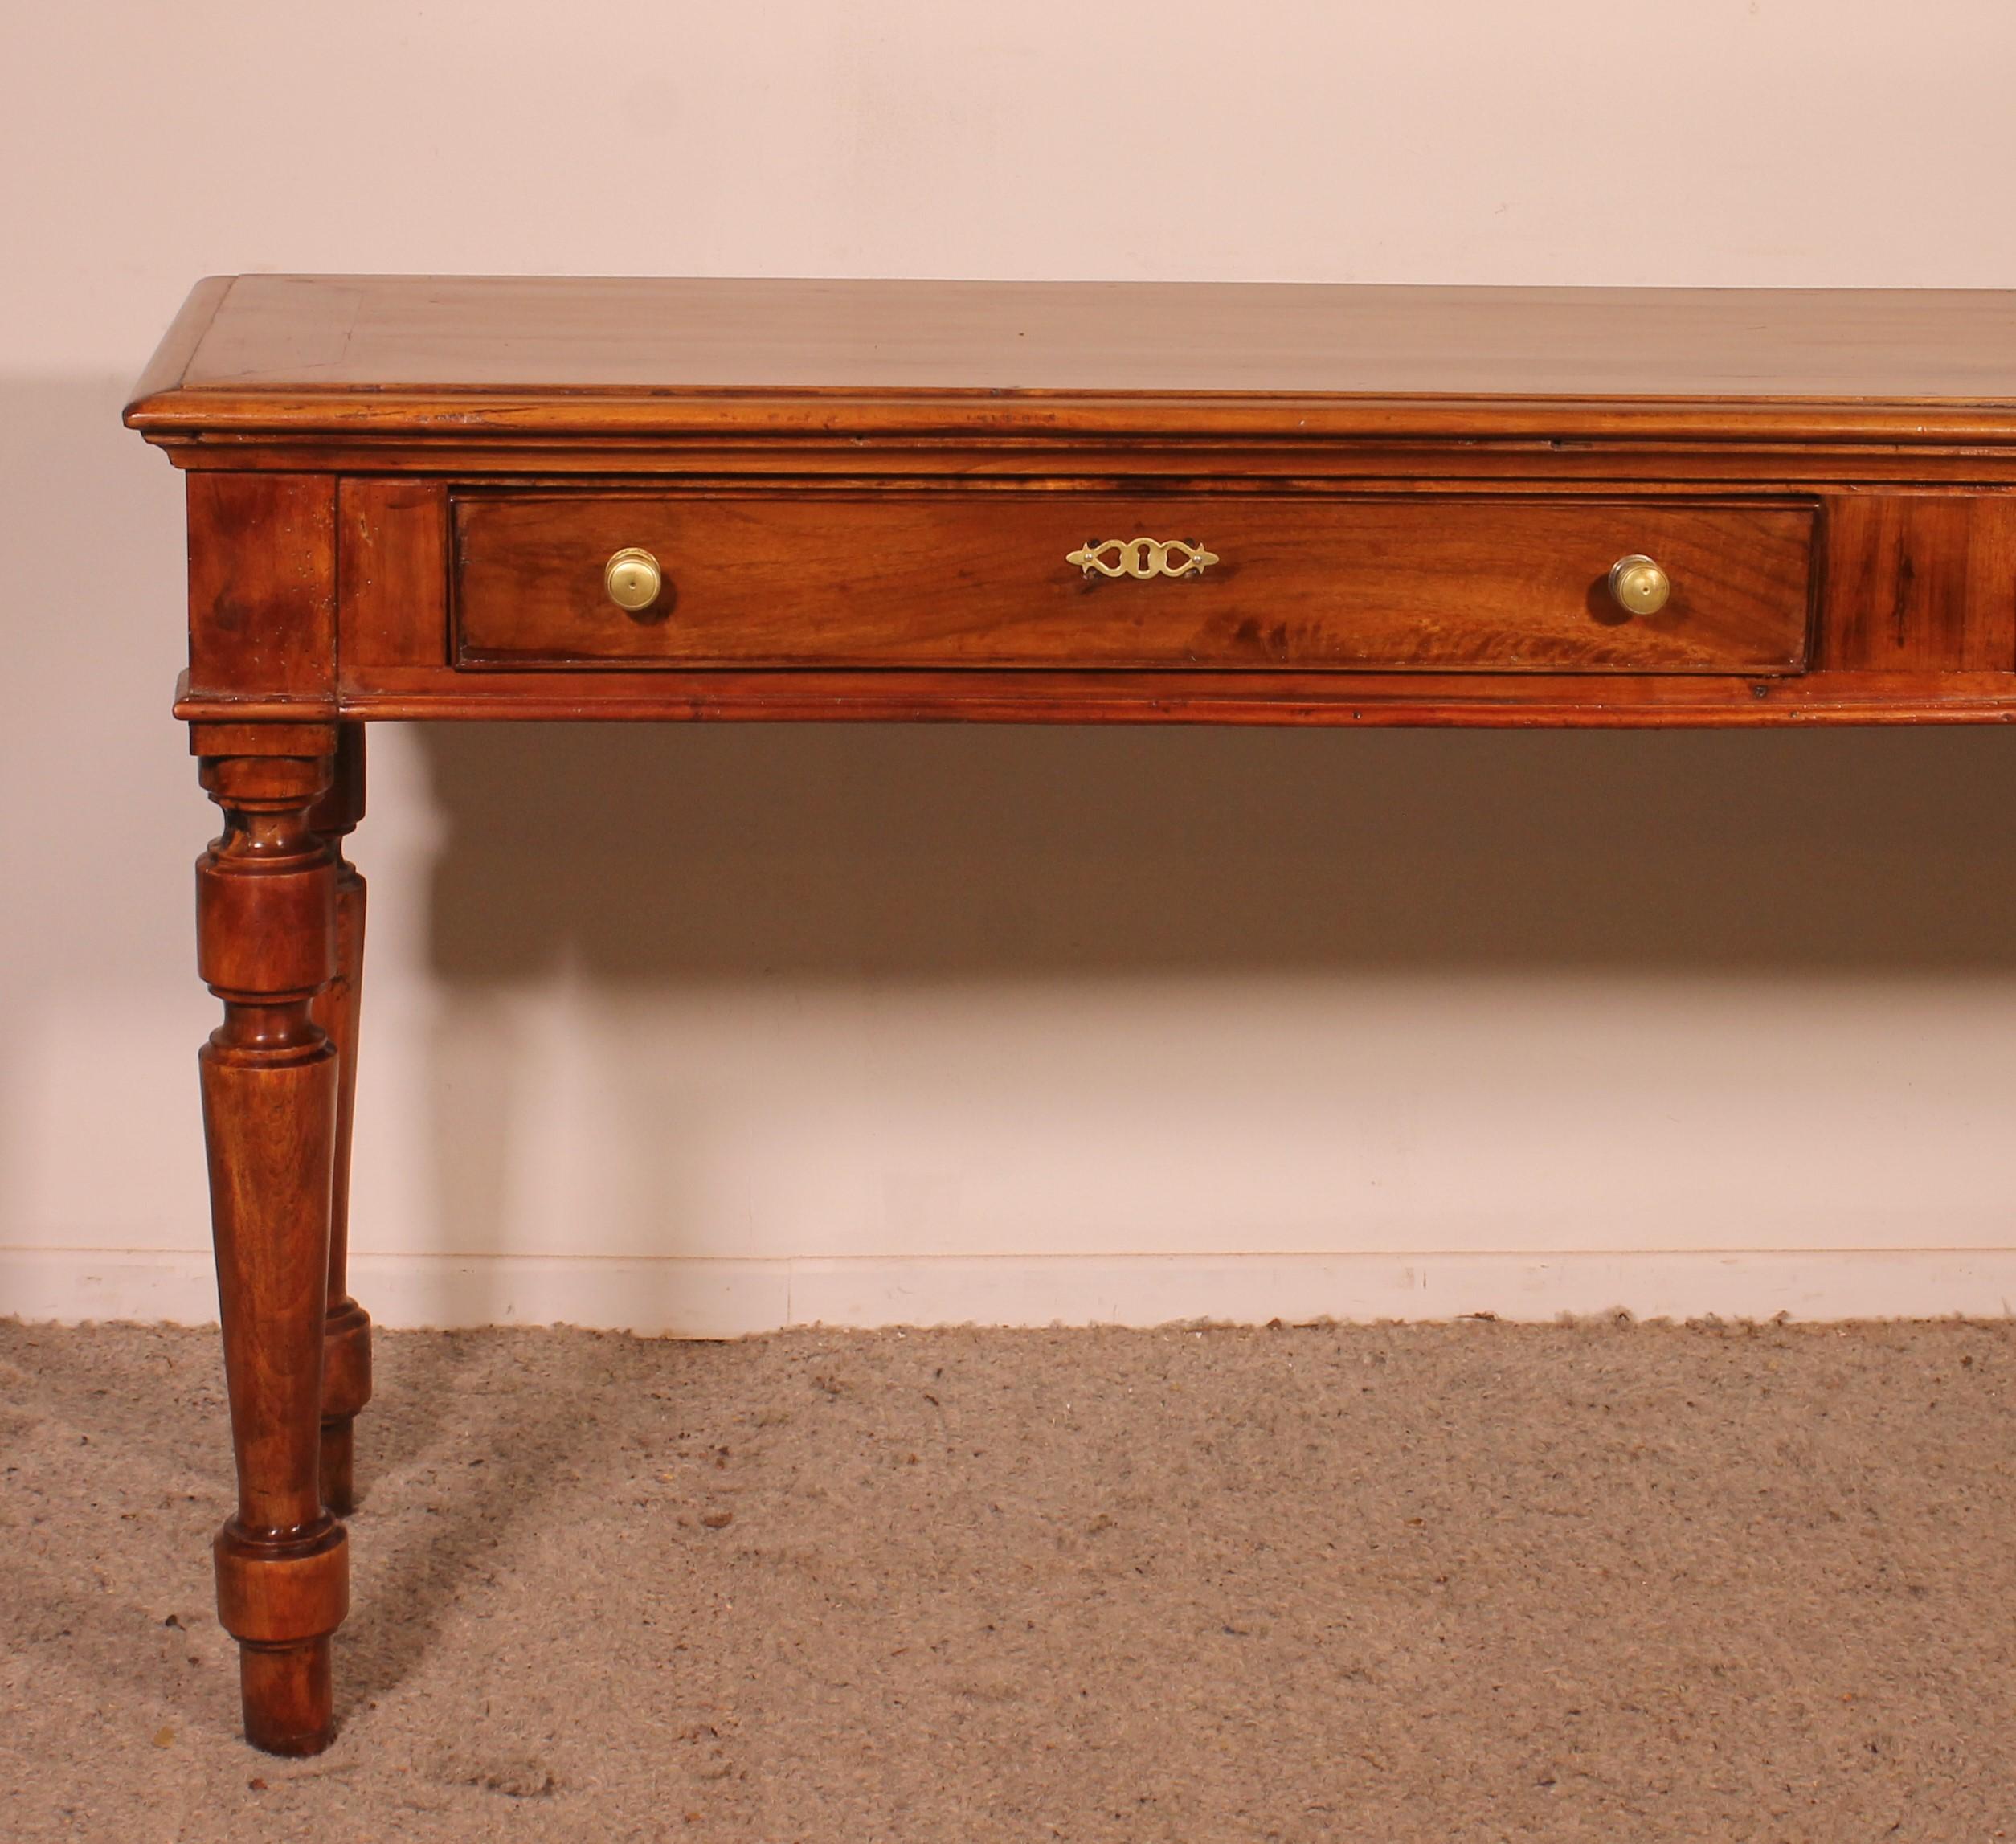 lovely 19th century french cherry wood console with two drawers

Very beautiful double-sided console or server with one side made up of two drawers and the other side worked (not in raw wood)
It is therefore possible to put it against a wall or in